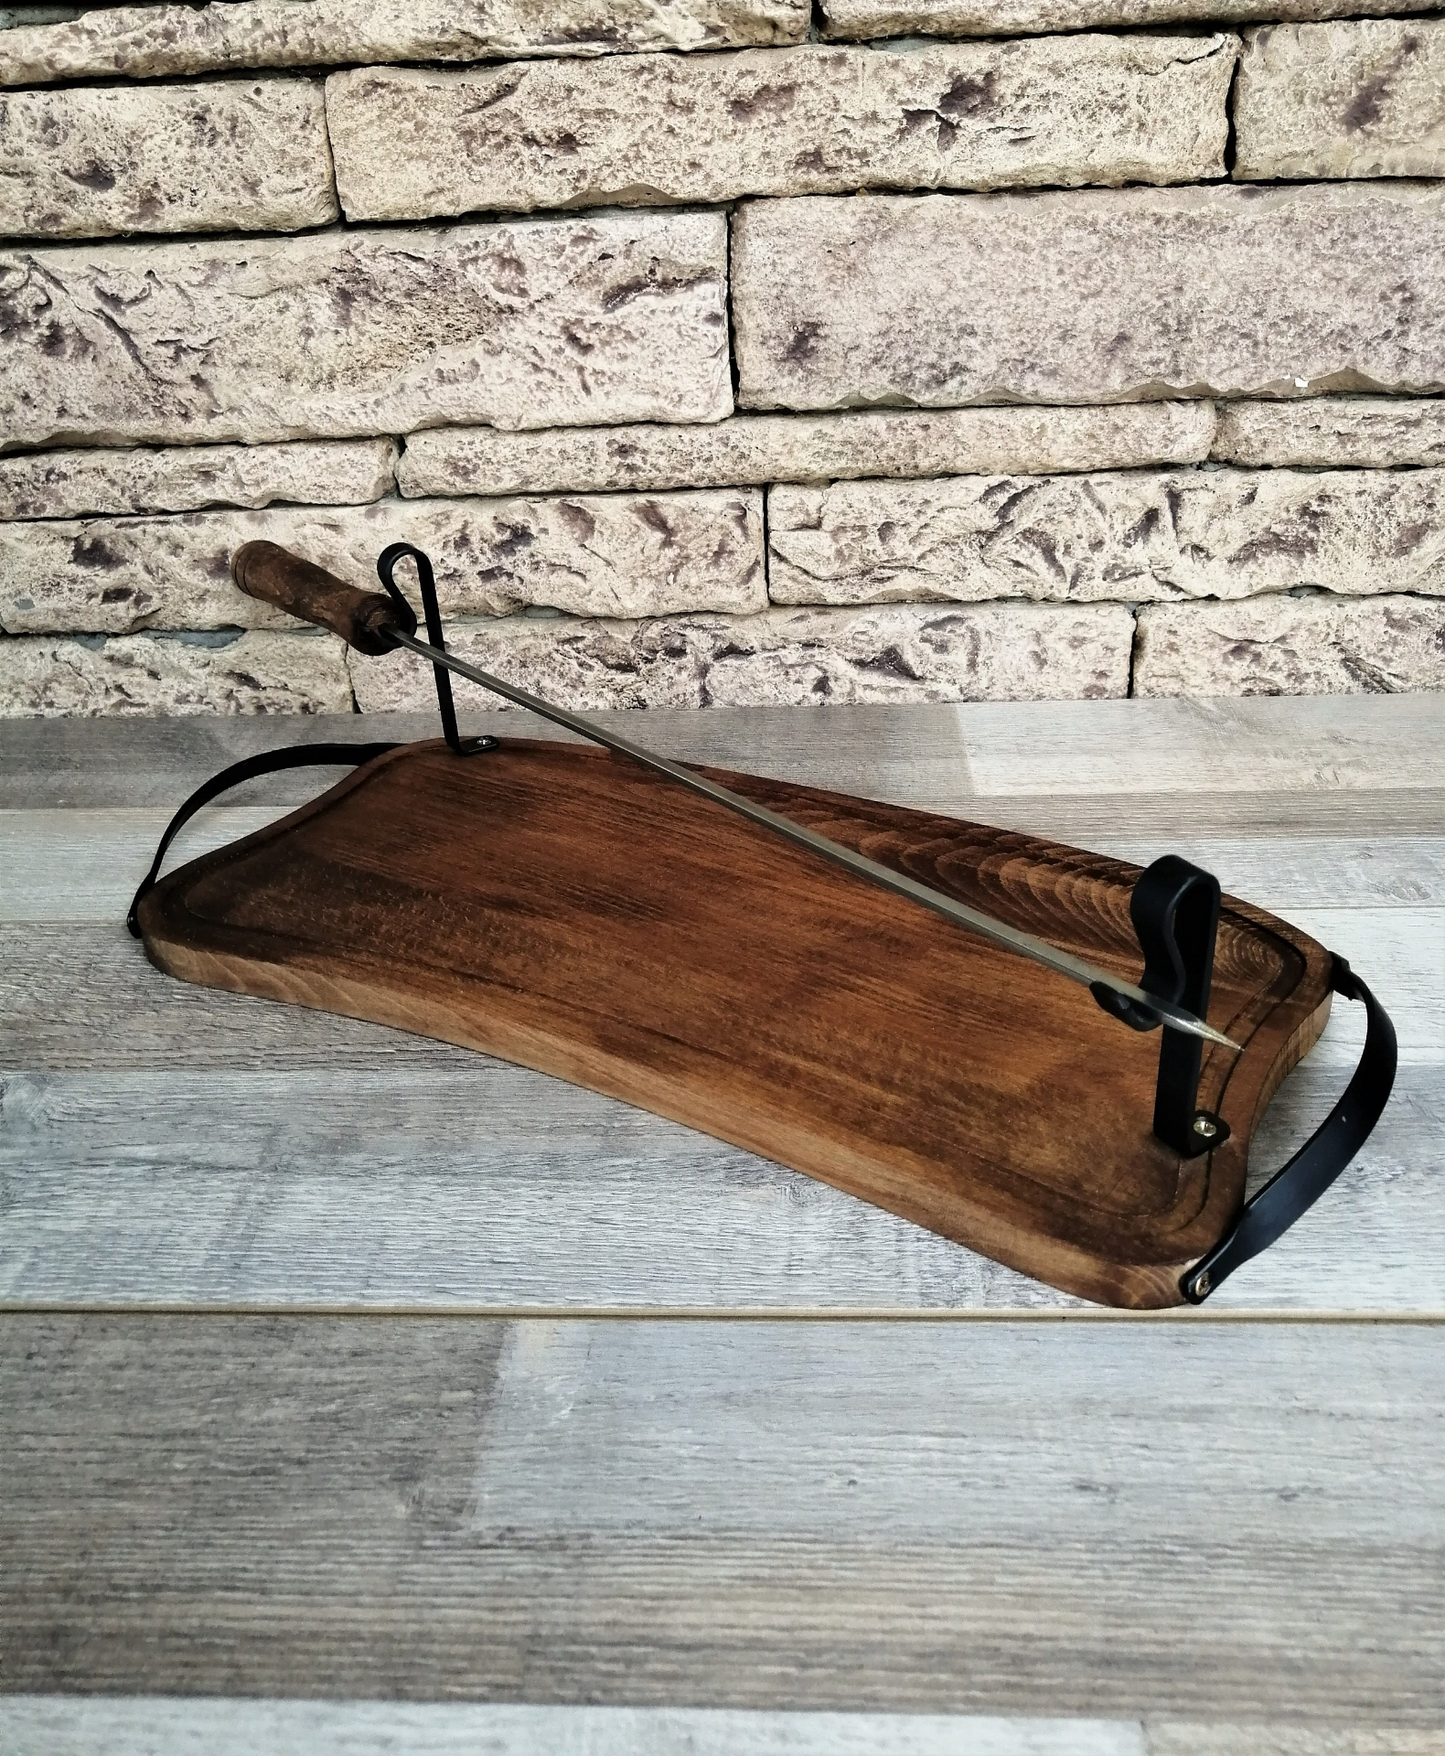 Wooden Tray with Handles for Barbecue, Iron Skewer with Wood Grip, Top Gift for Dad